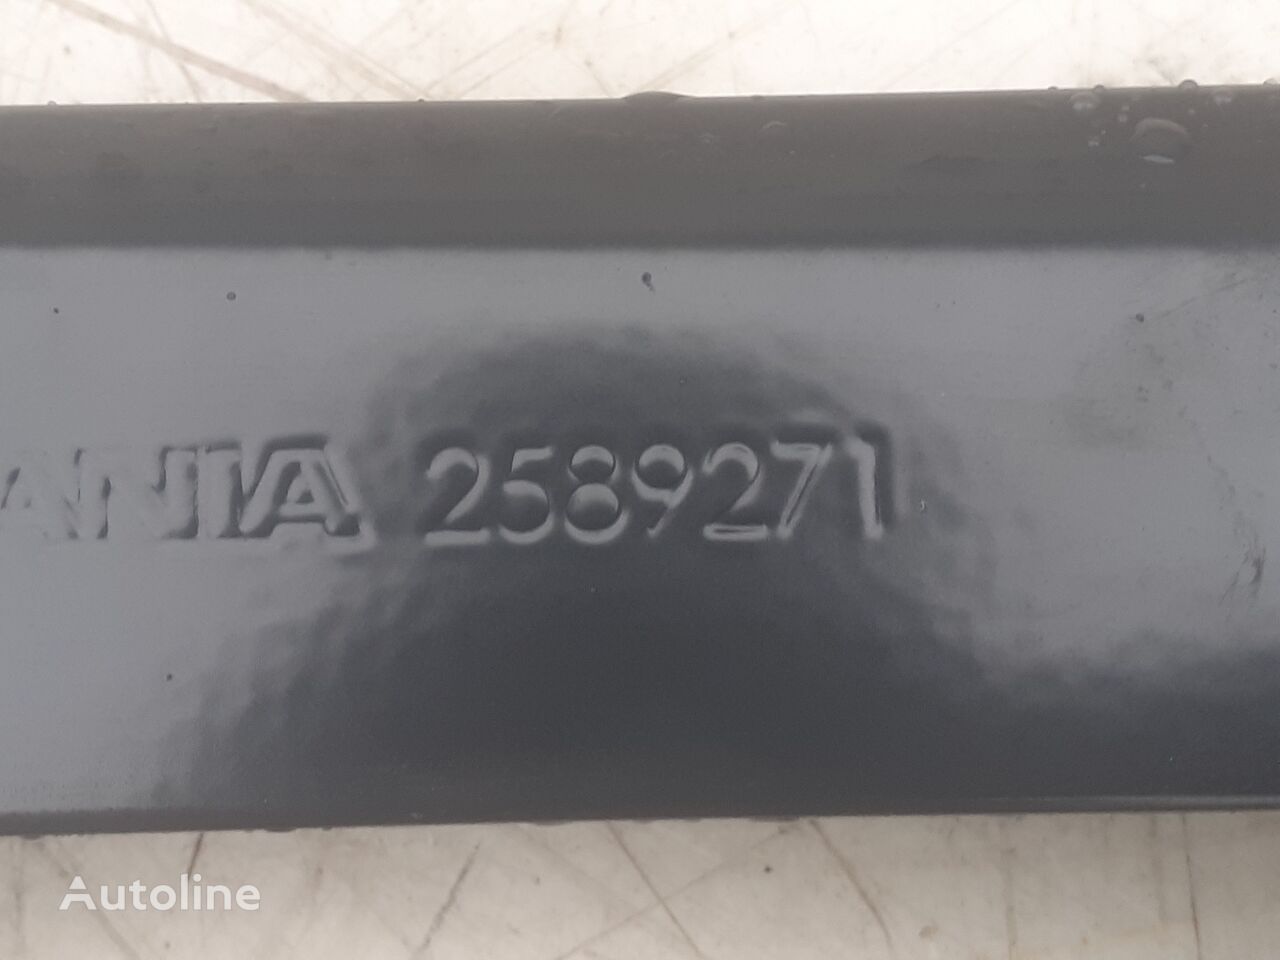 P450 2589271 for Scania L,P,G,R,S series truck